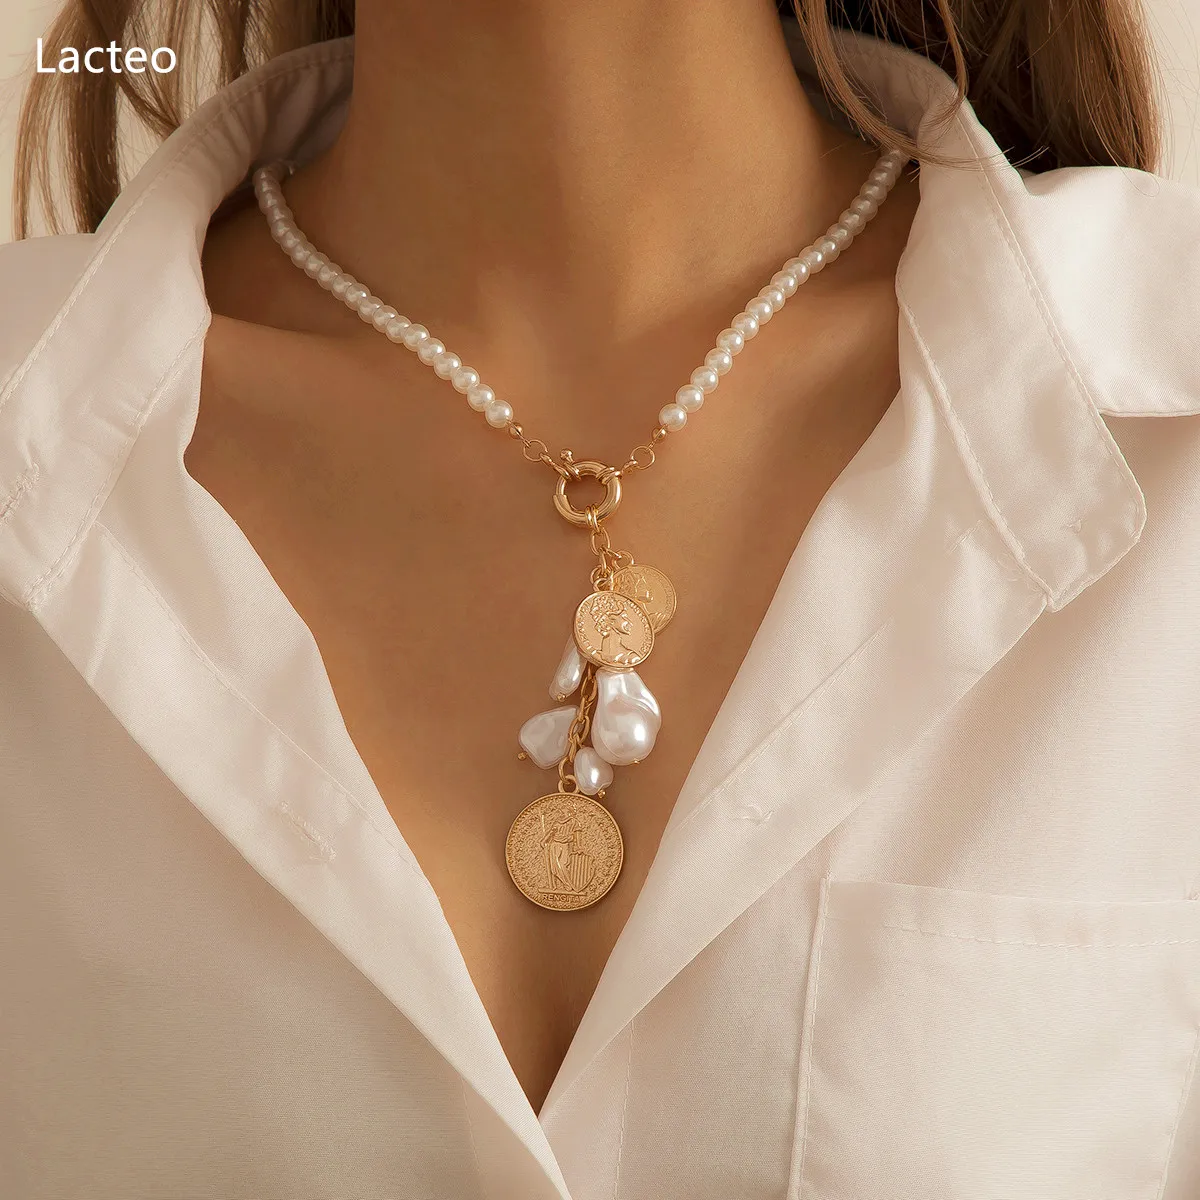 

Lacteo Bohemian Imitation Pearl Chain Choker Necklace Vintage Carved Coin Virgin Mary Statue Pendant Necklace For Women Jewelry